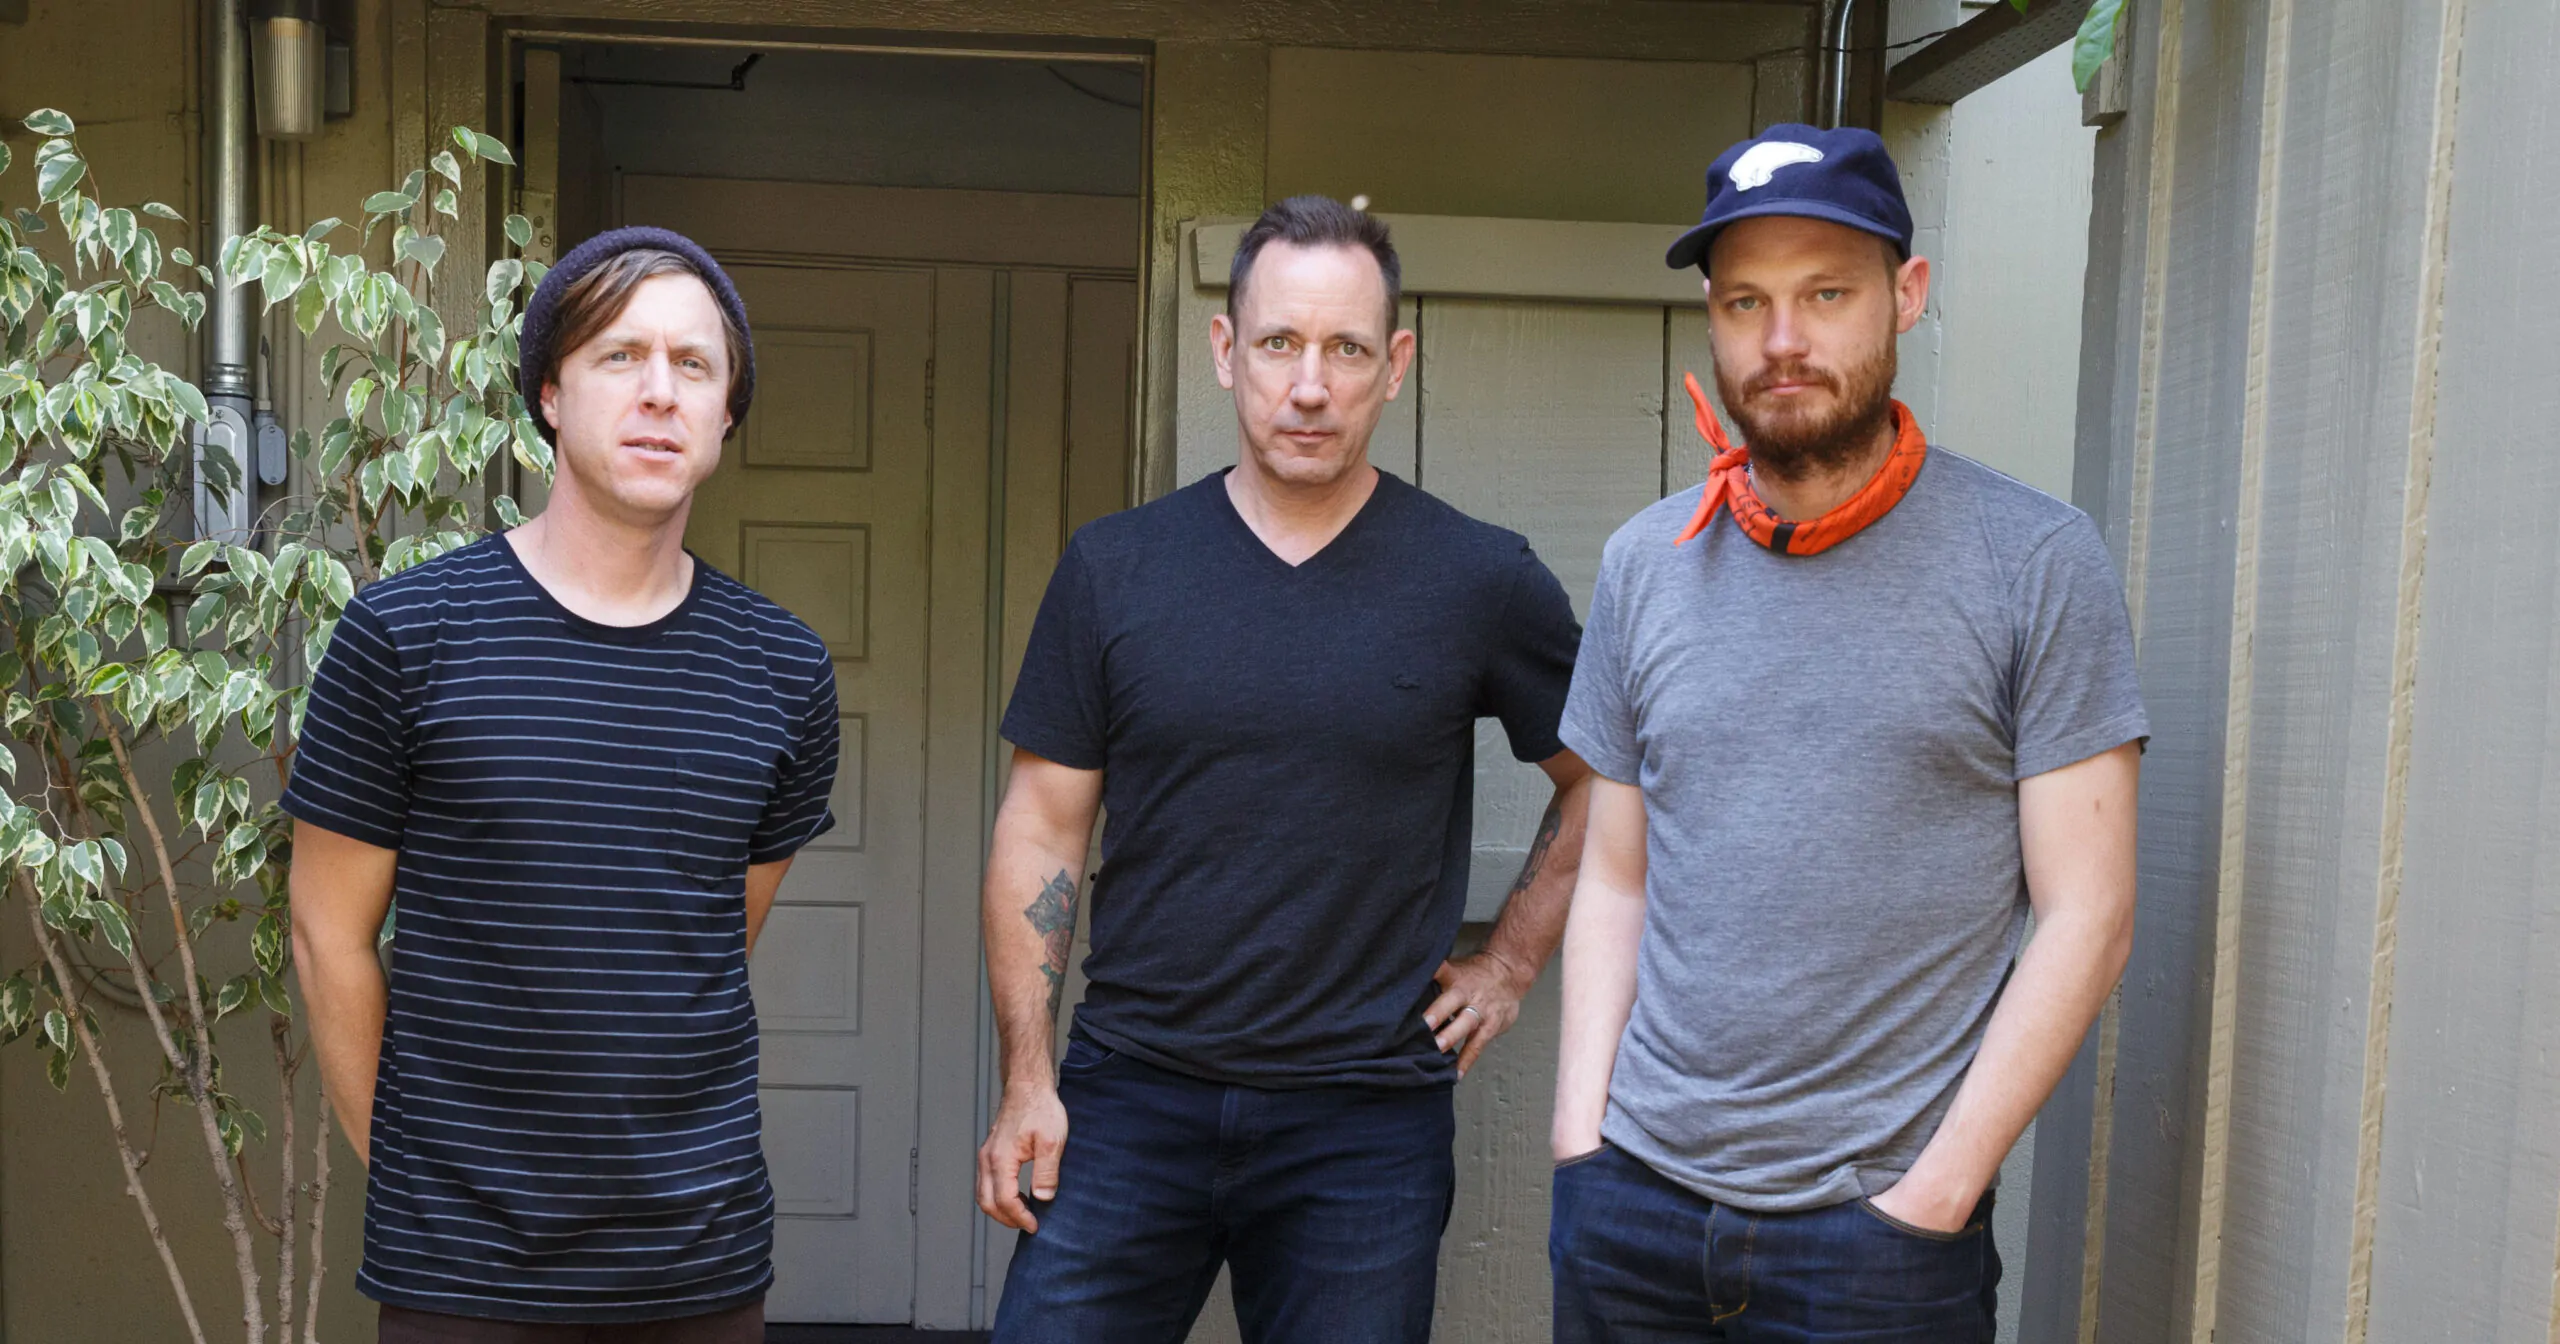 TRACK PREMIERE: Jimmy Chamberlin Complex announce new album & share new single ‘Grace’ – Listen Now!